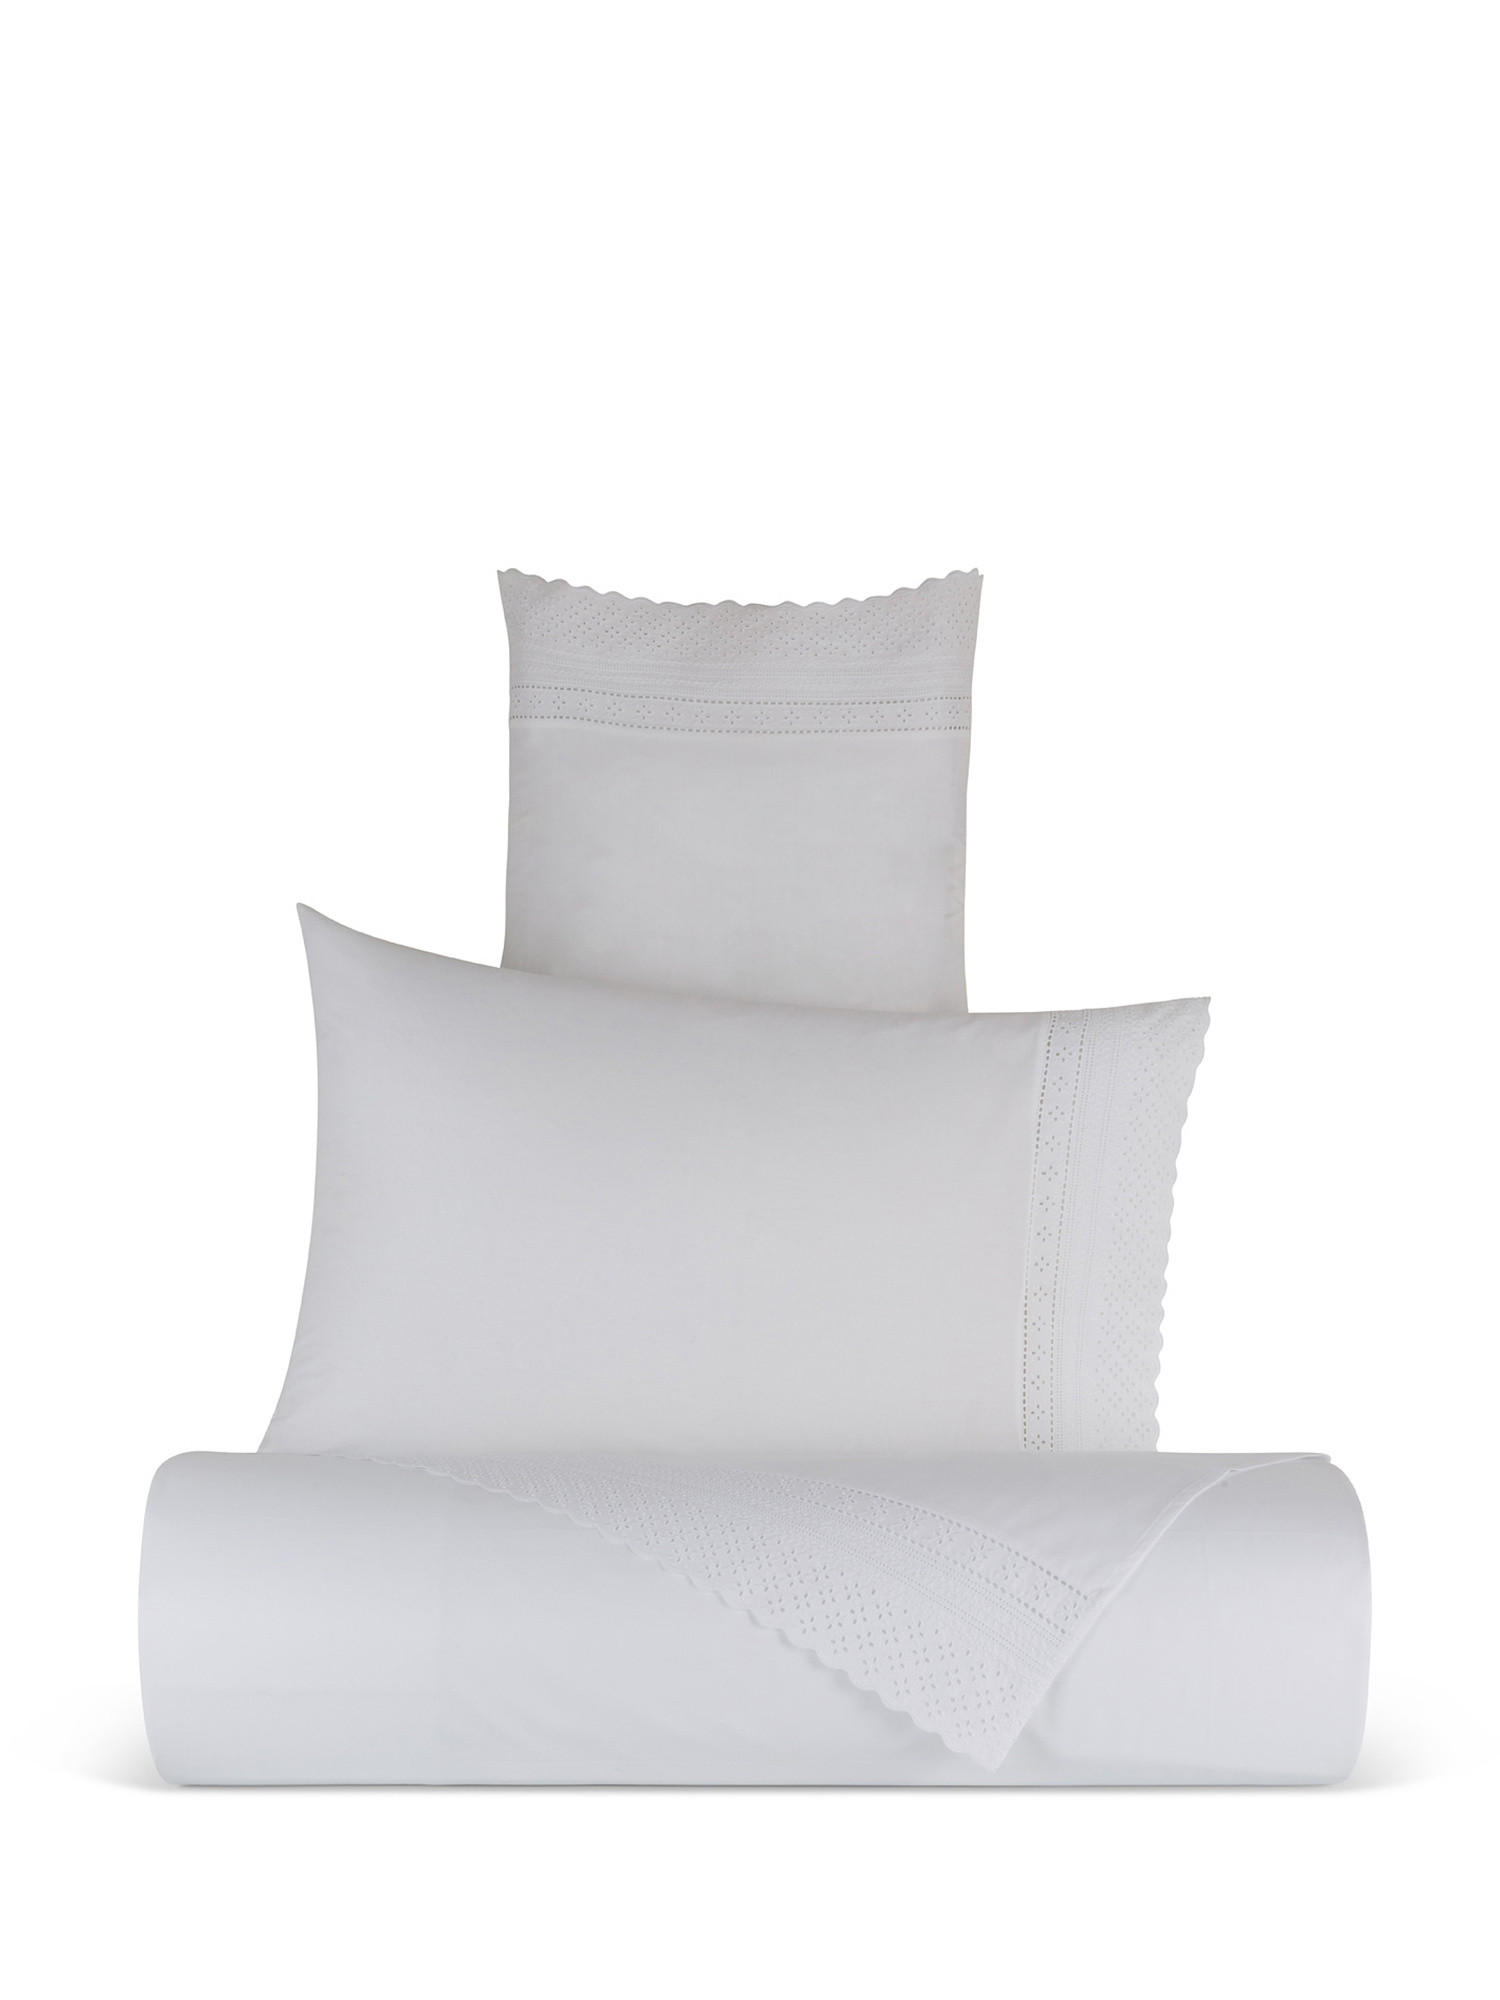 Portofino flat sheet in 100% cotton percale with Sangallo lace, White, large image number 0